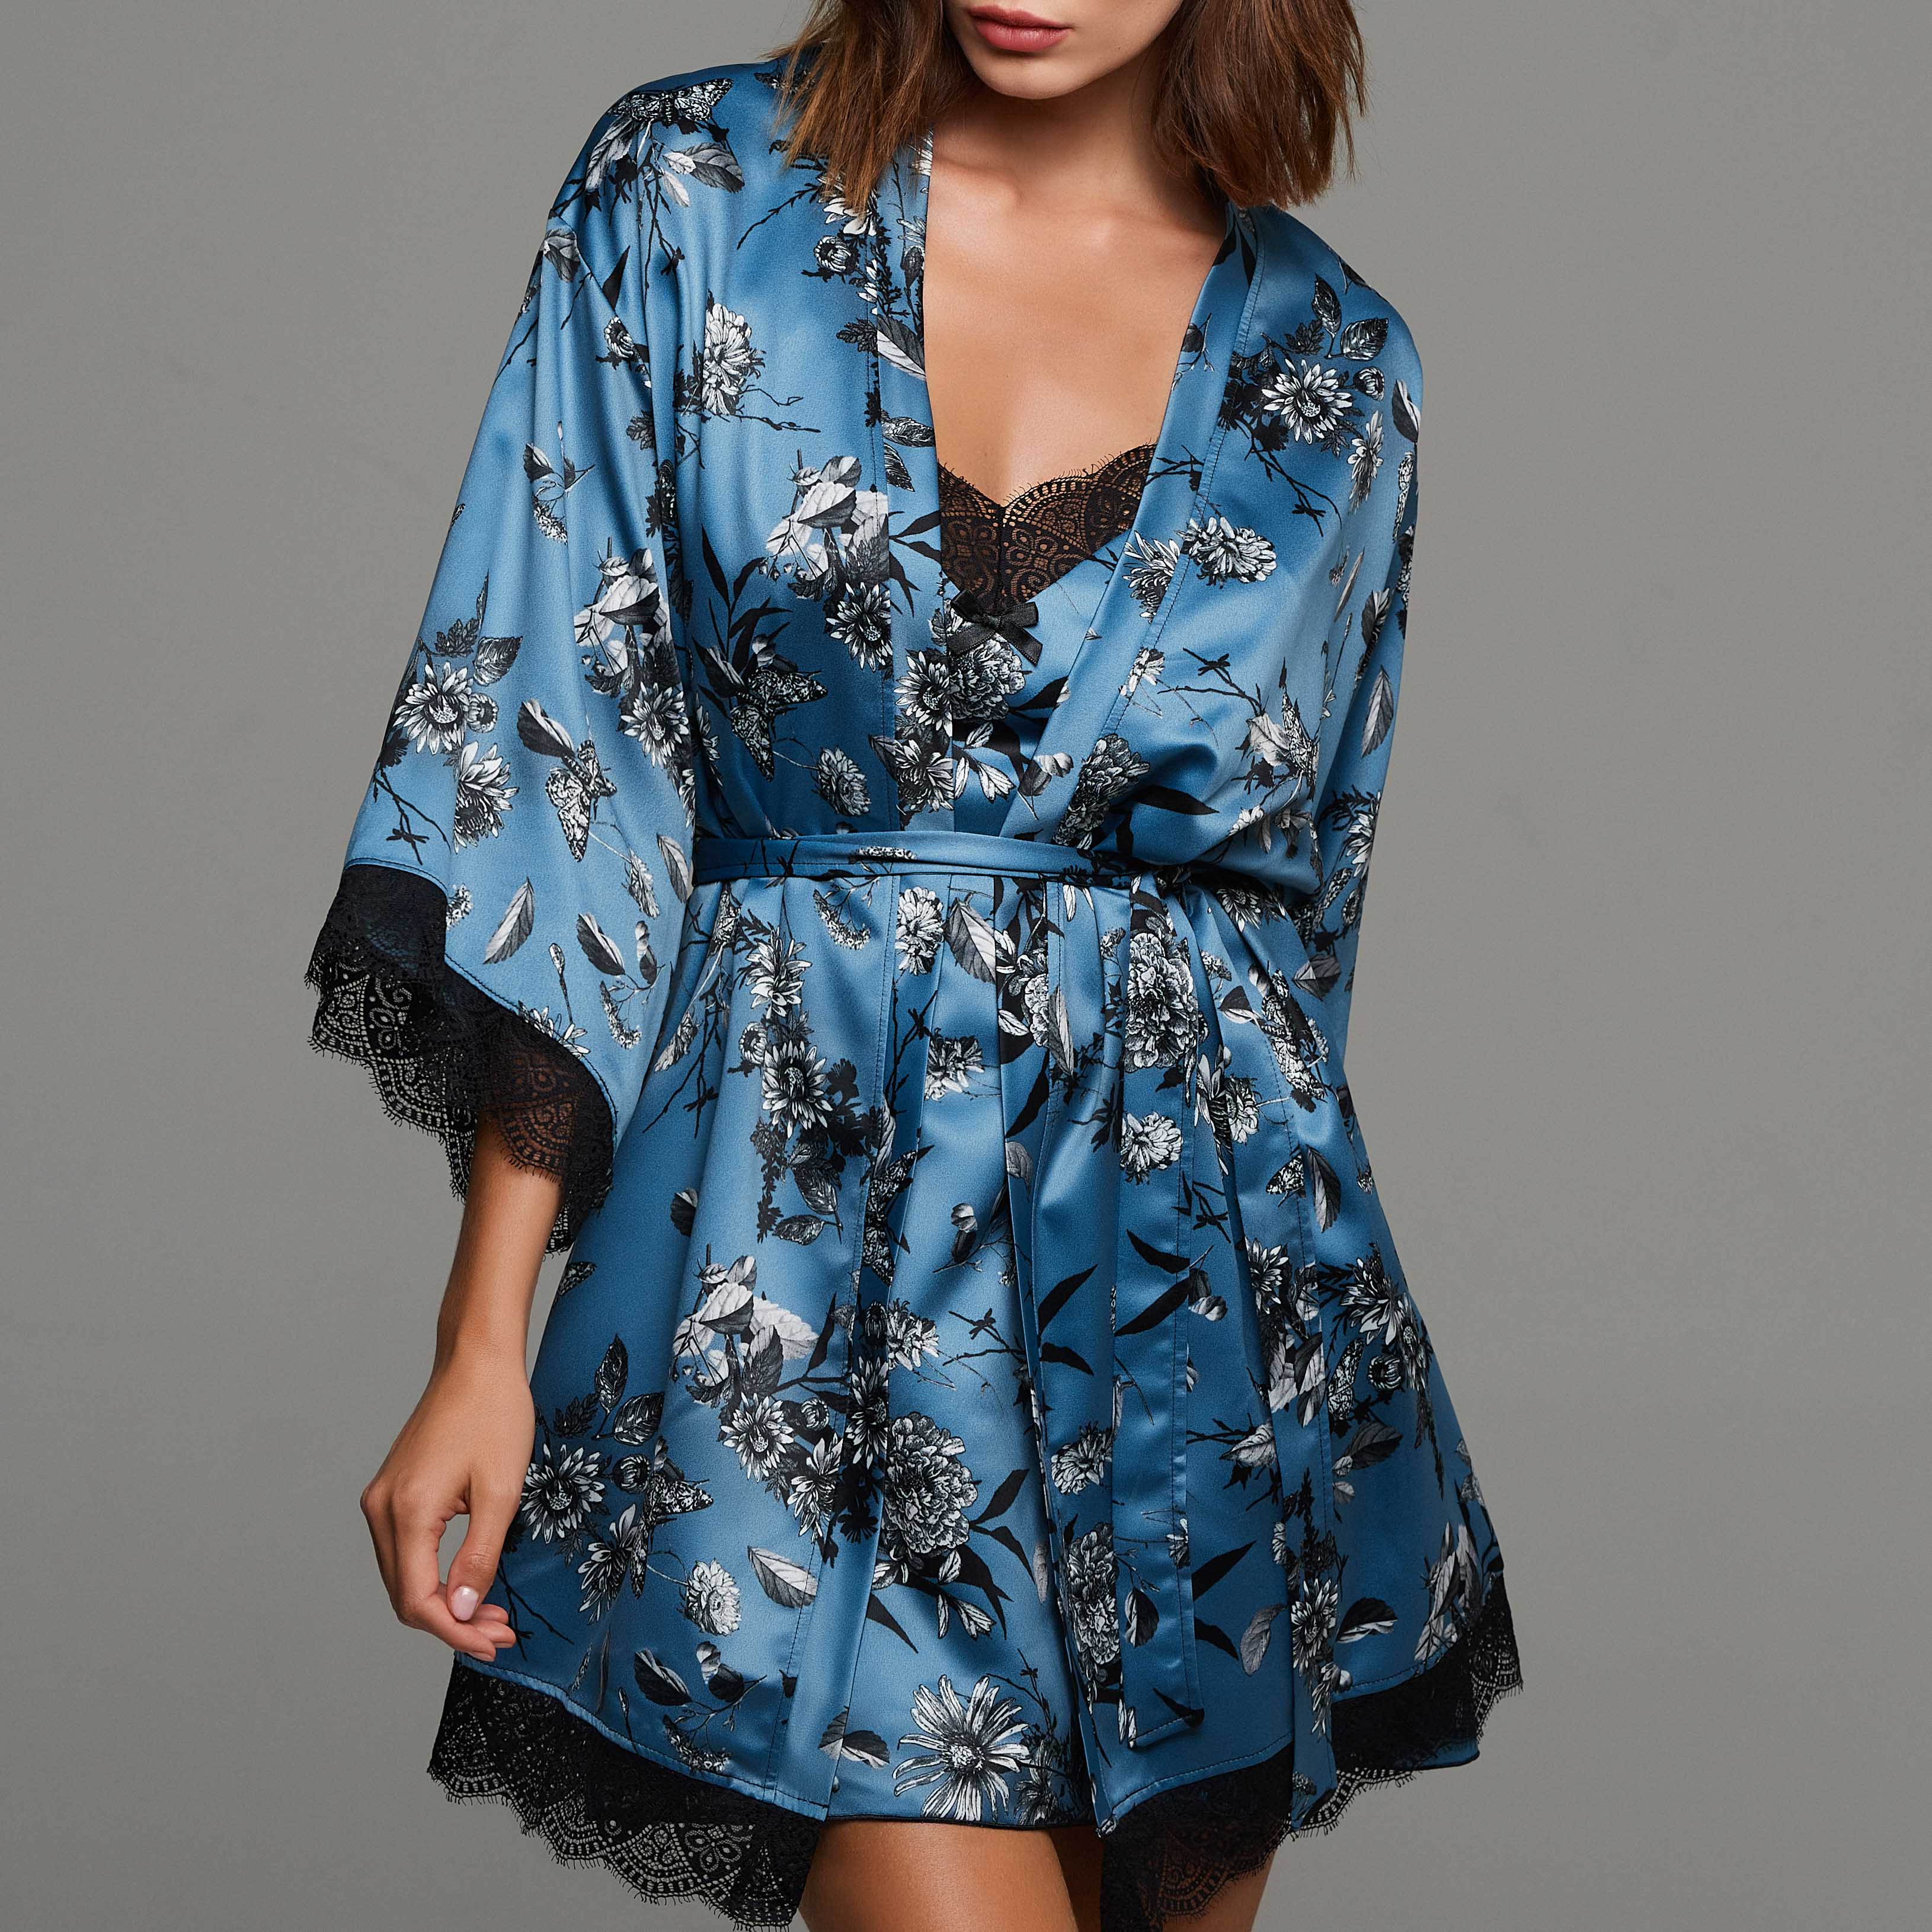 Satin floral robe with lace